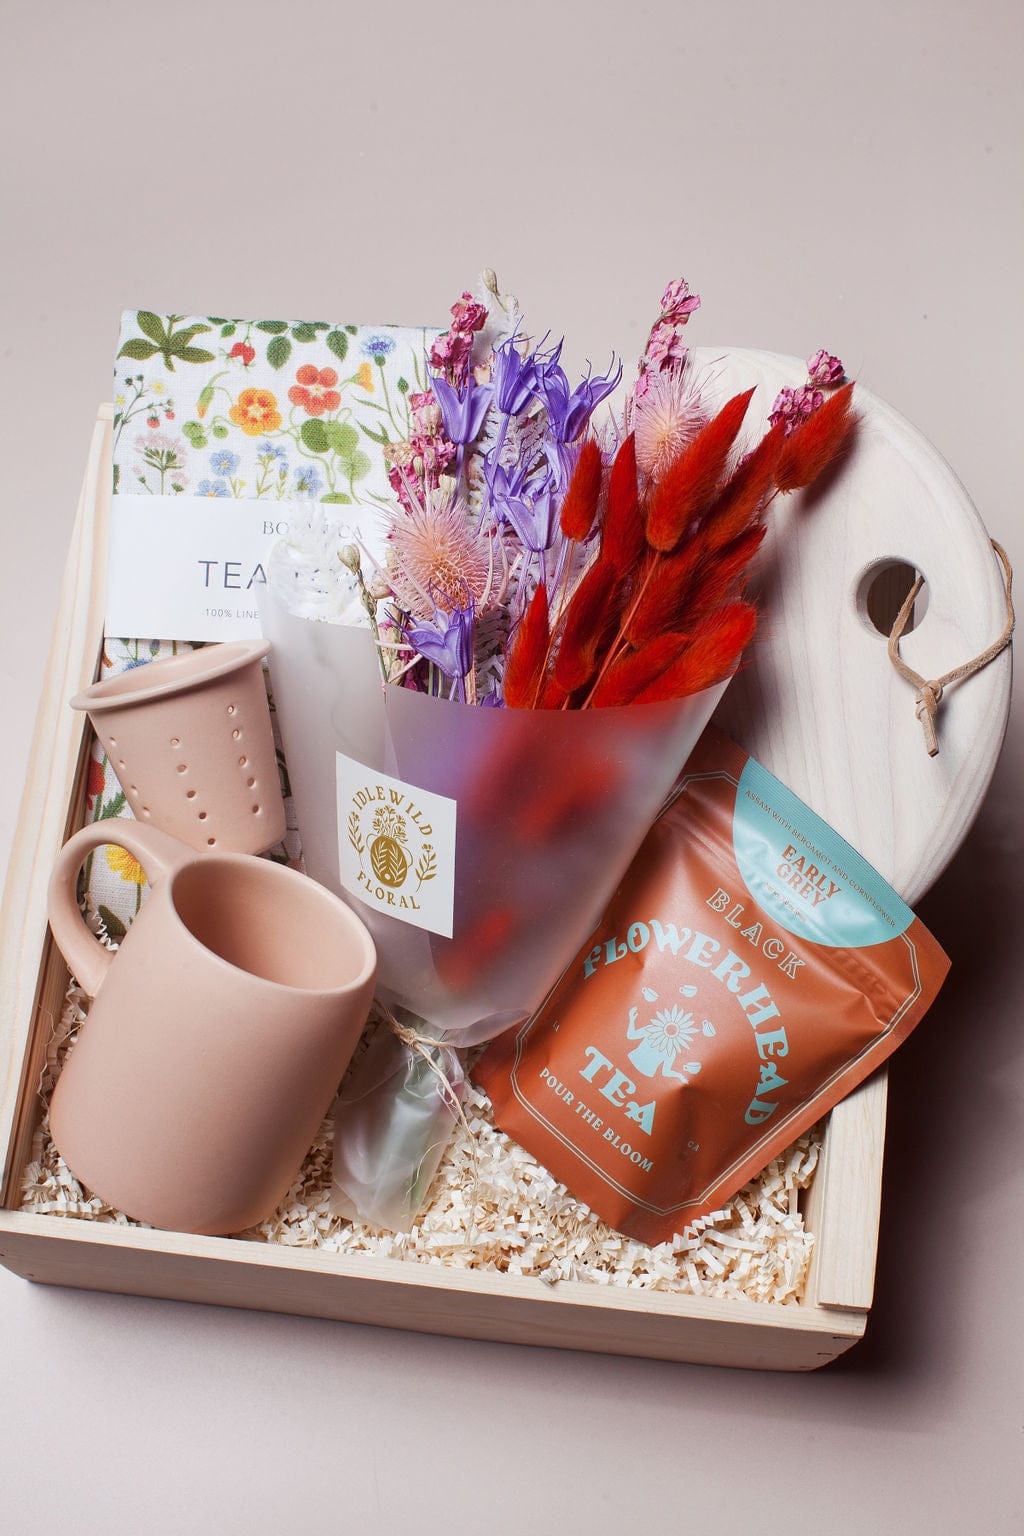 Idlewild Floral Co. Gift Giving Wildflower Tea Gift Box